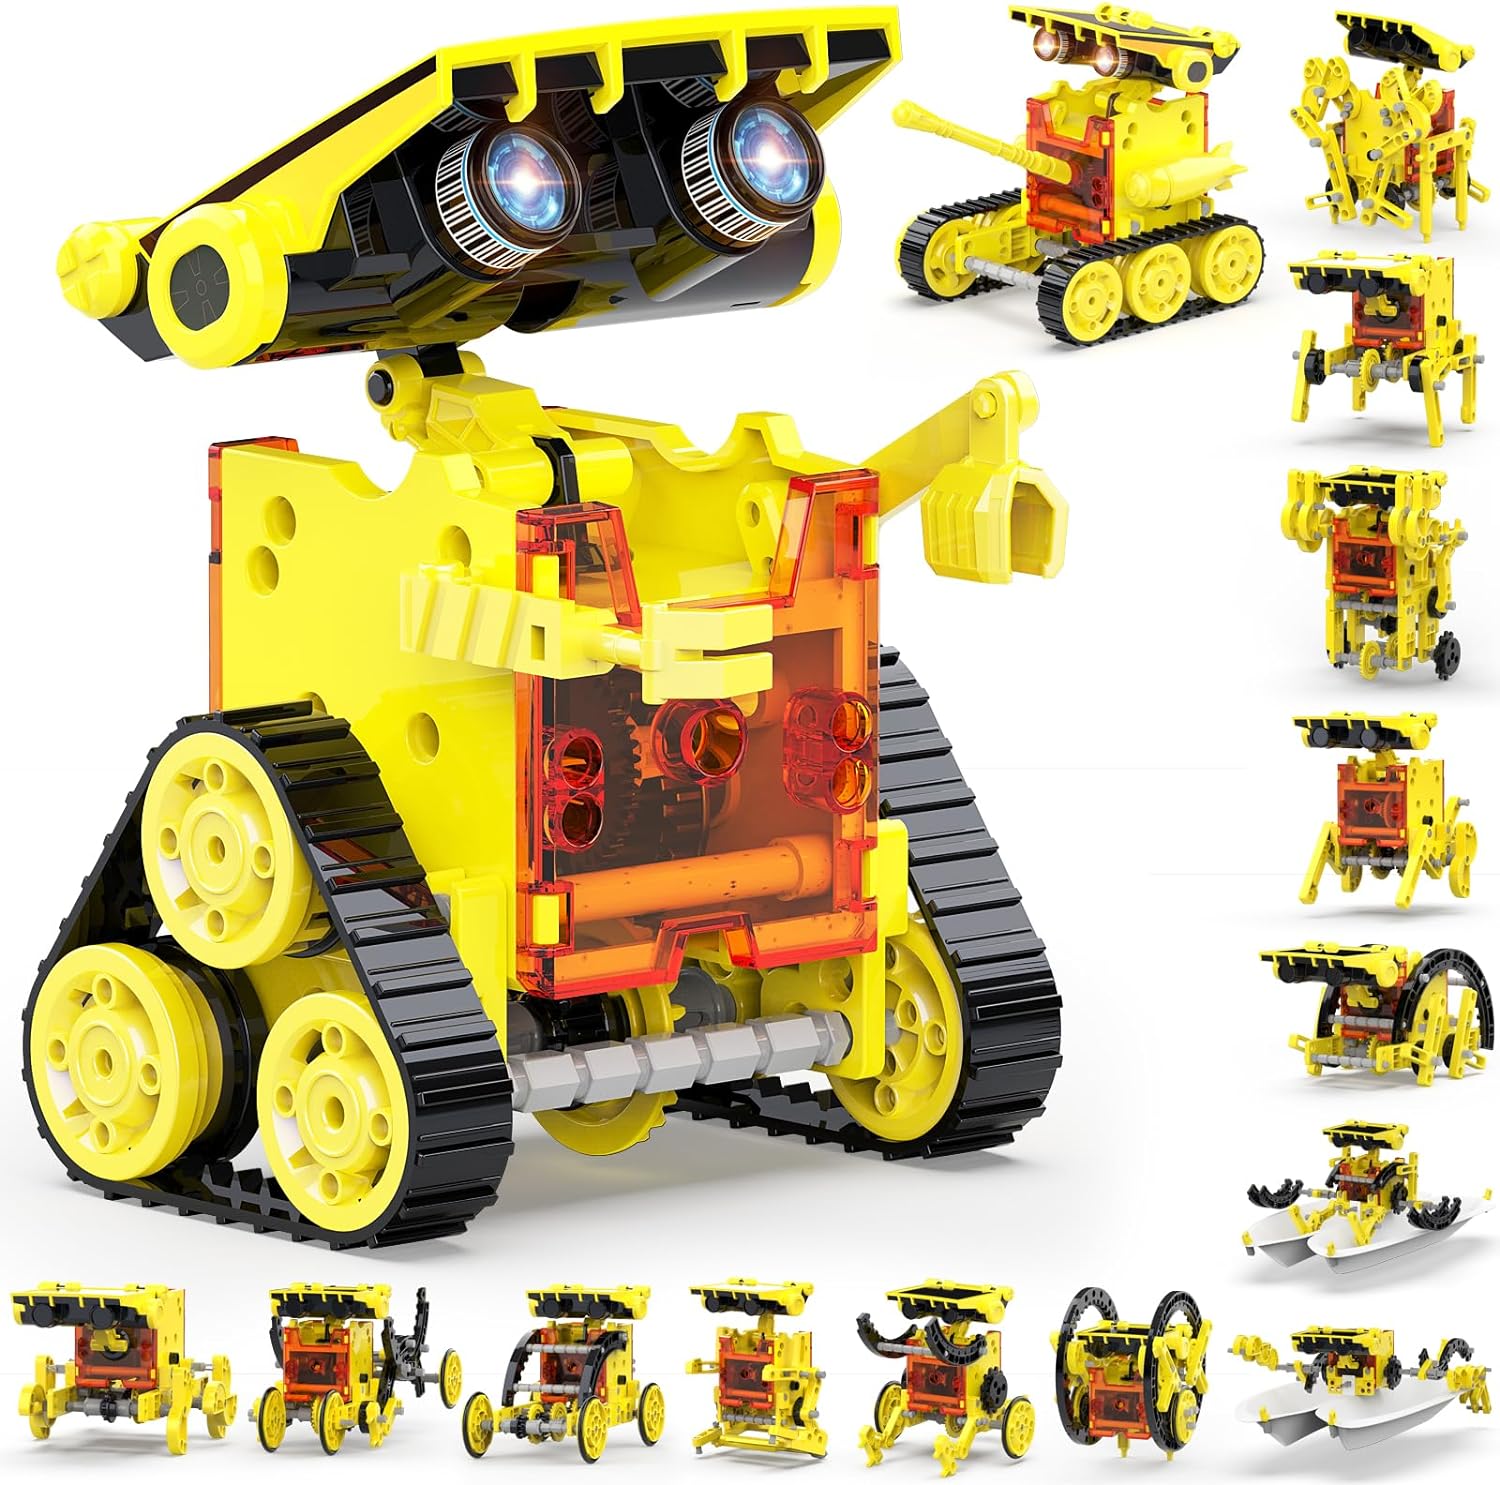 30-in-1 STEM Solar Robot Kit Toys, 243 Pieces Educational Building Science Experiment Kit for Kids Aged 8-12, Birthday Gifts Kids Aged 8 9 10 11 12 13 Years Old(Yellow)